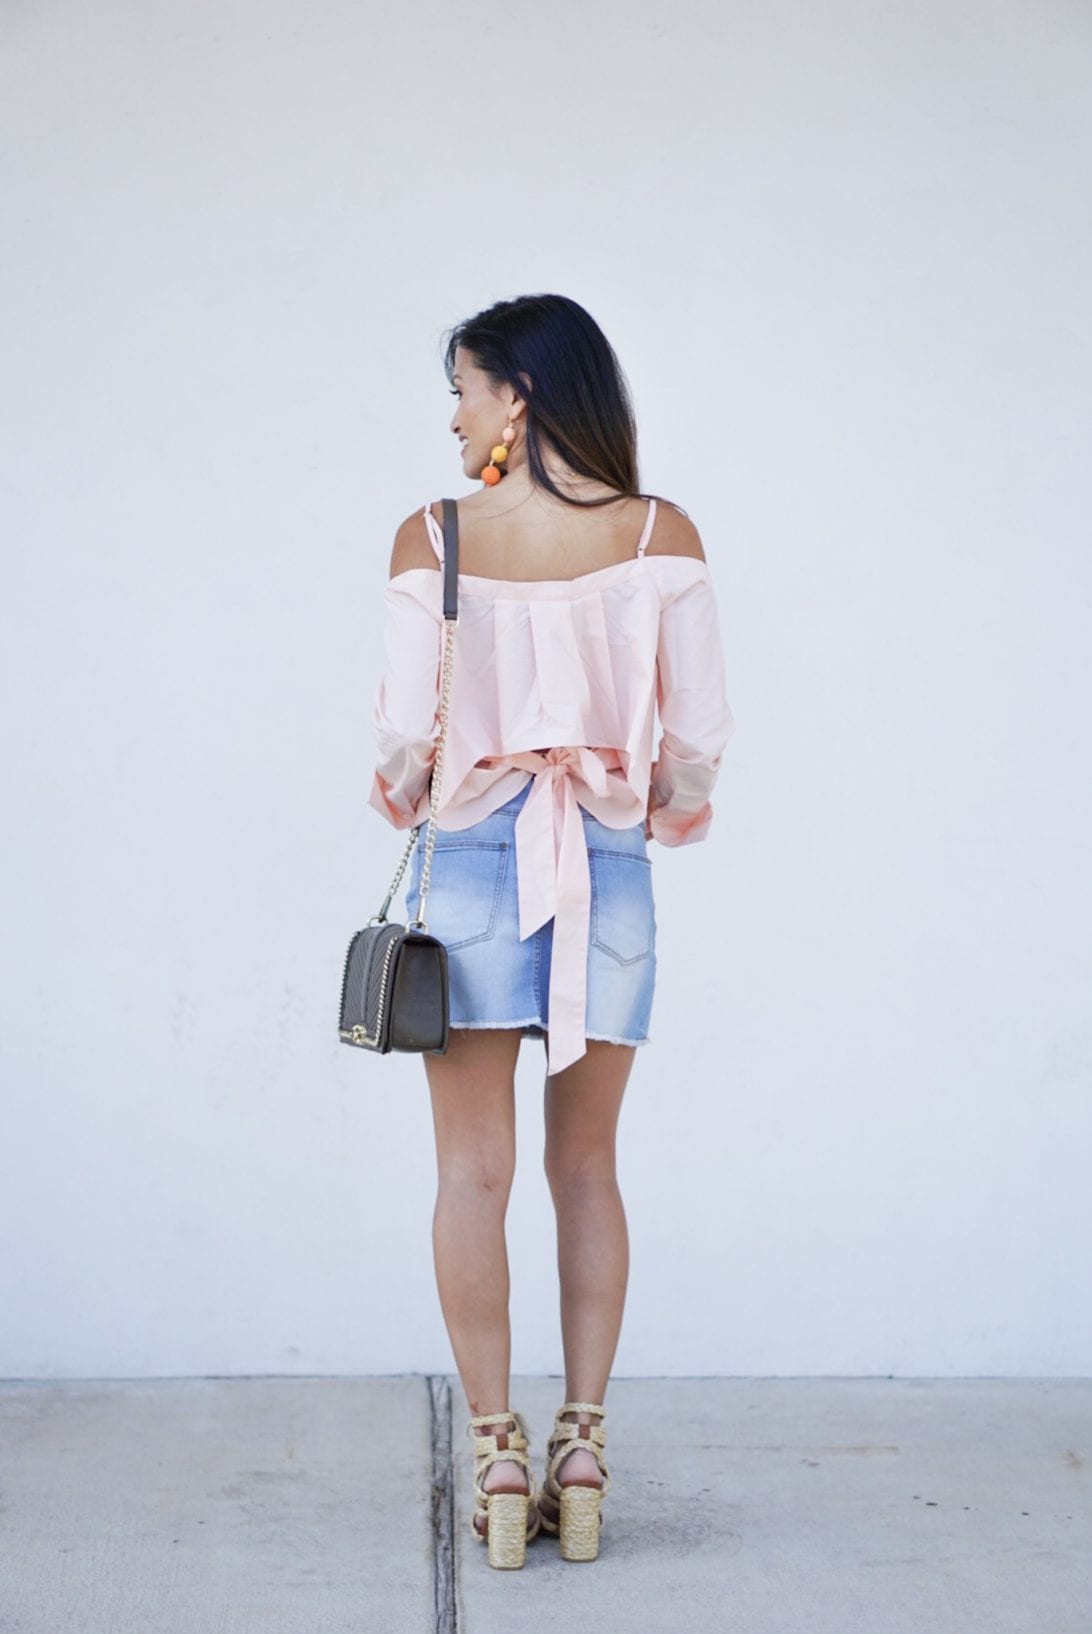 LONG SLEEVE COLD SHOULDER BUTTON UP WITH PLEATED OPEN BACK AND BOW DETAIL, PEACH, denim skirt, rebecca minkoff cross body bag, bauble ball earrings, mia heels